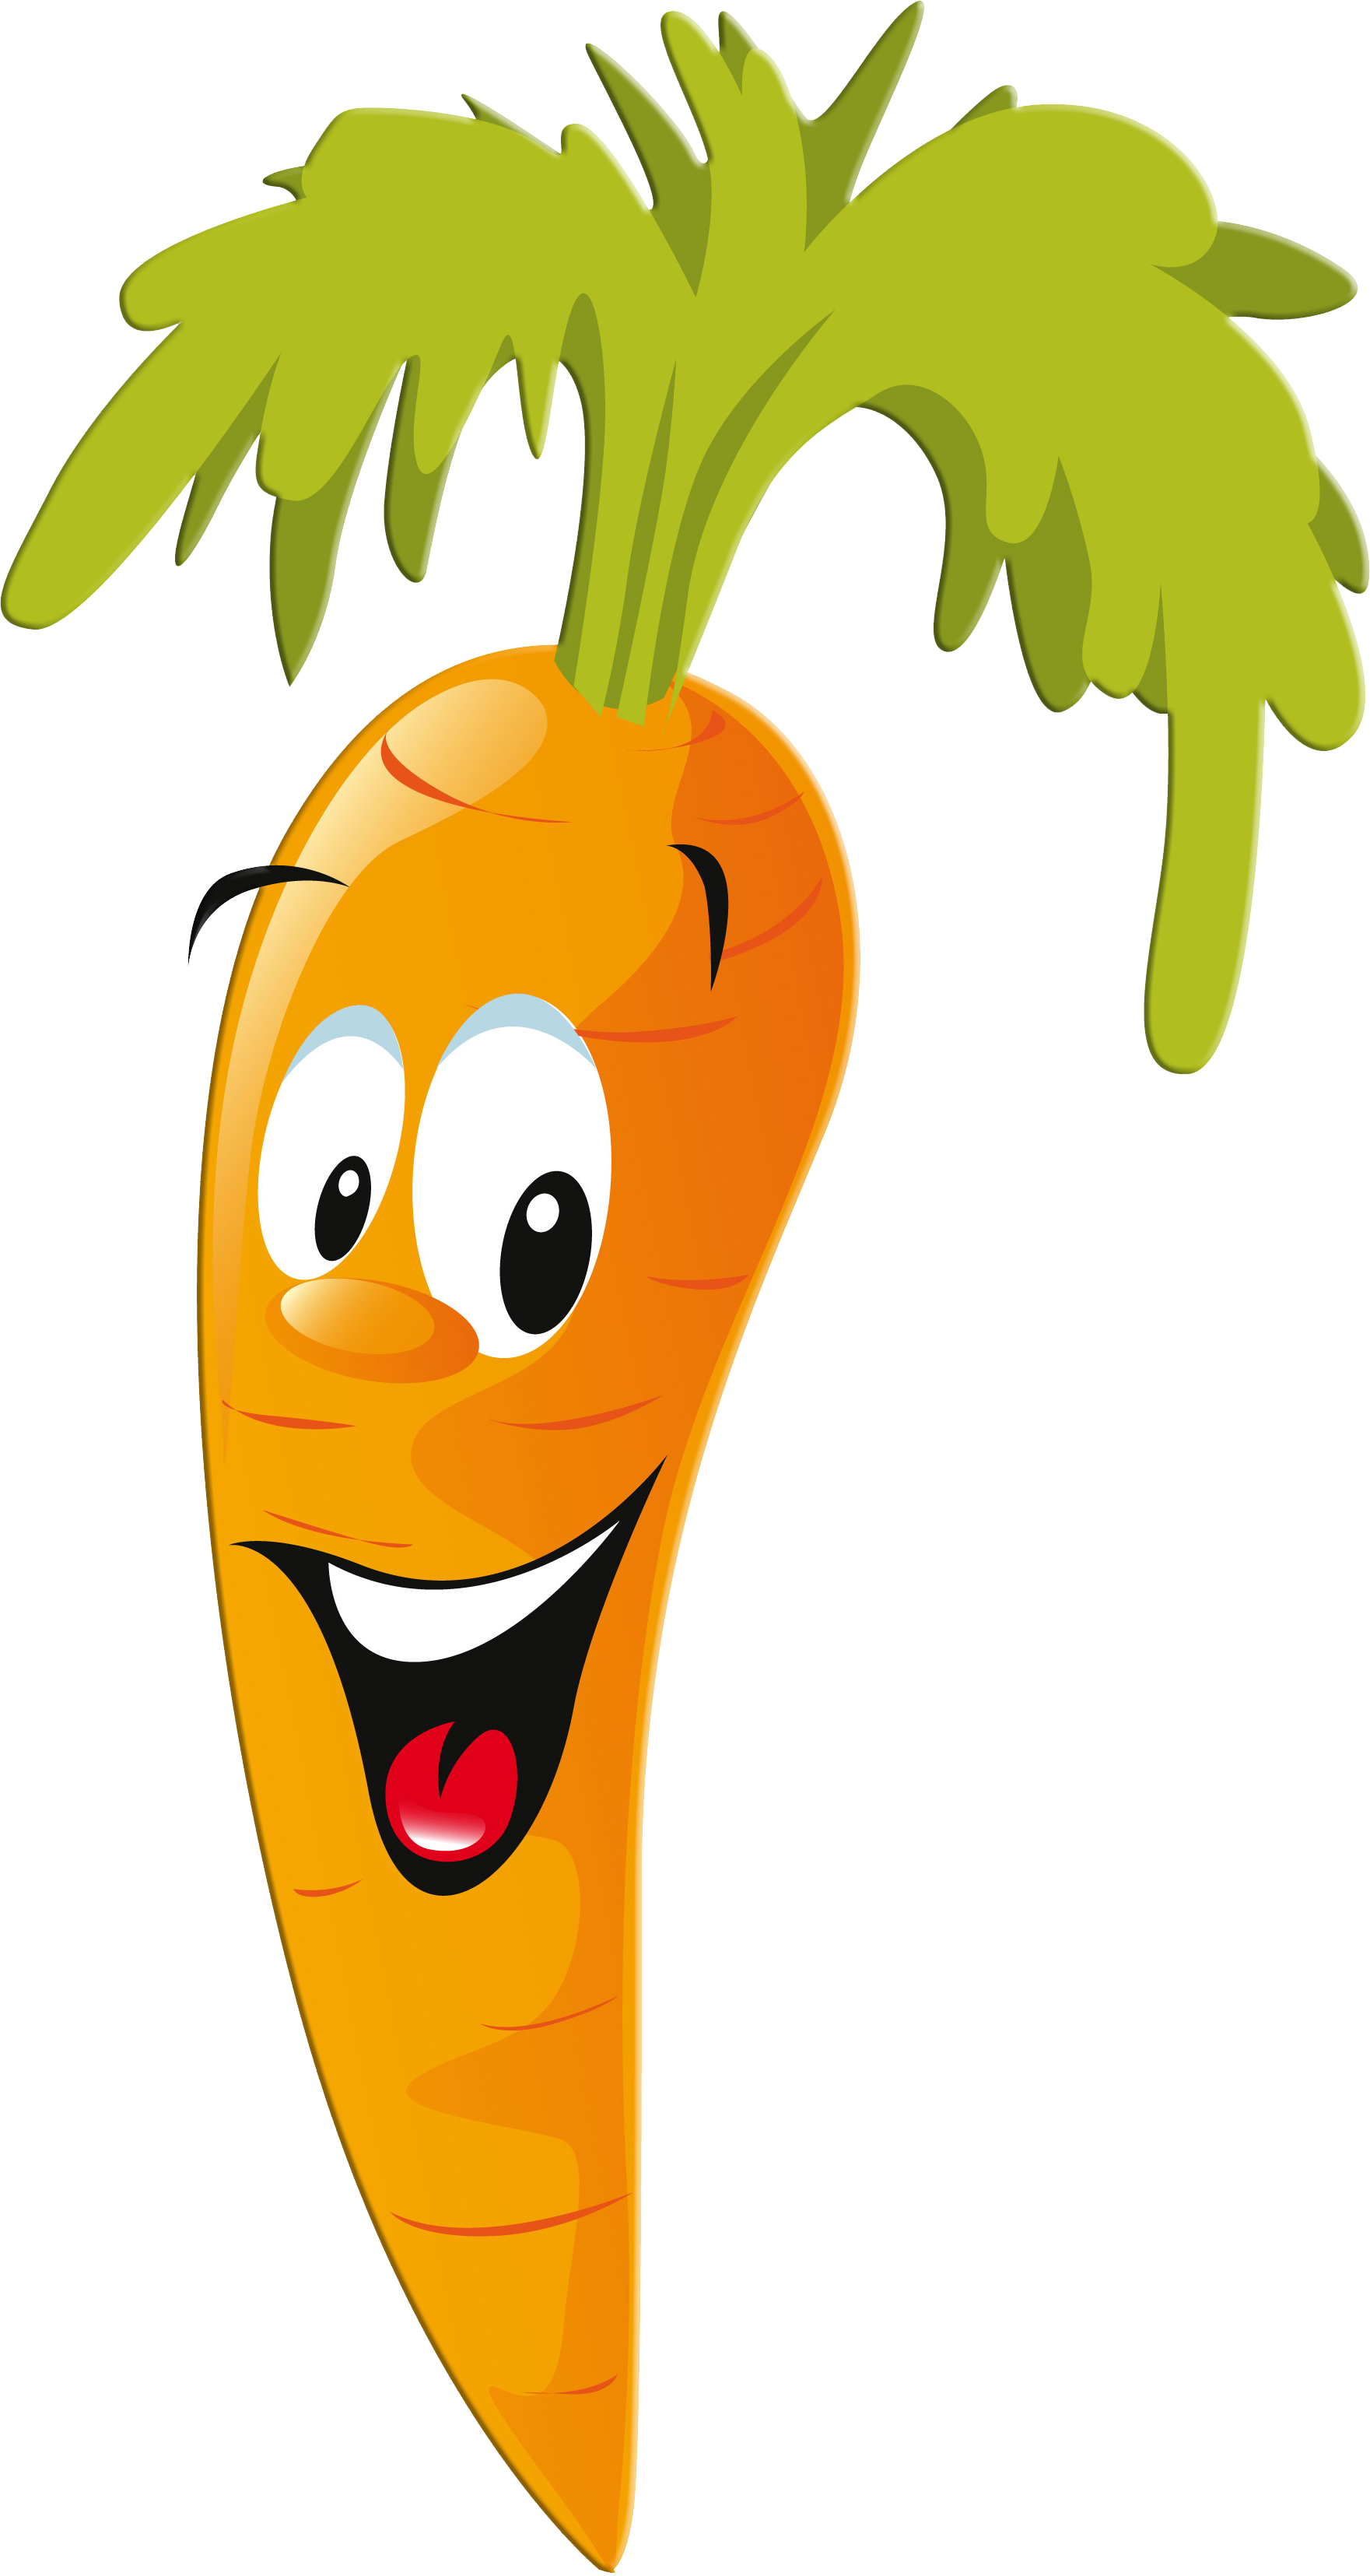 Pin by on art. Clipart fruit carrot